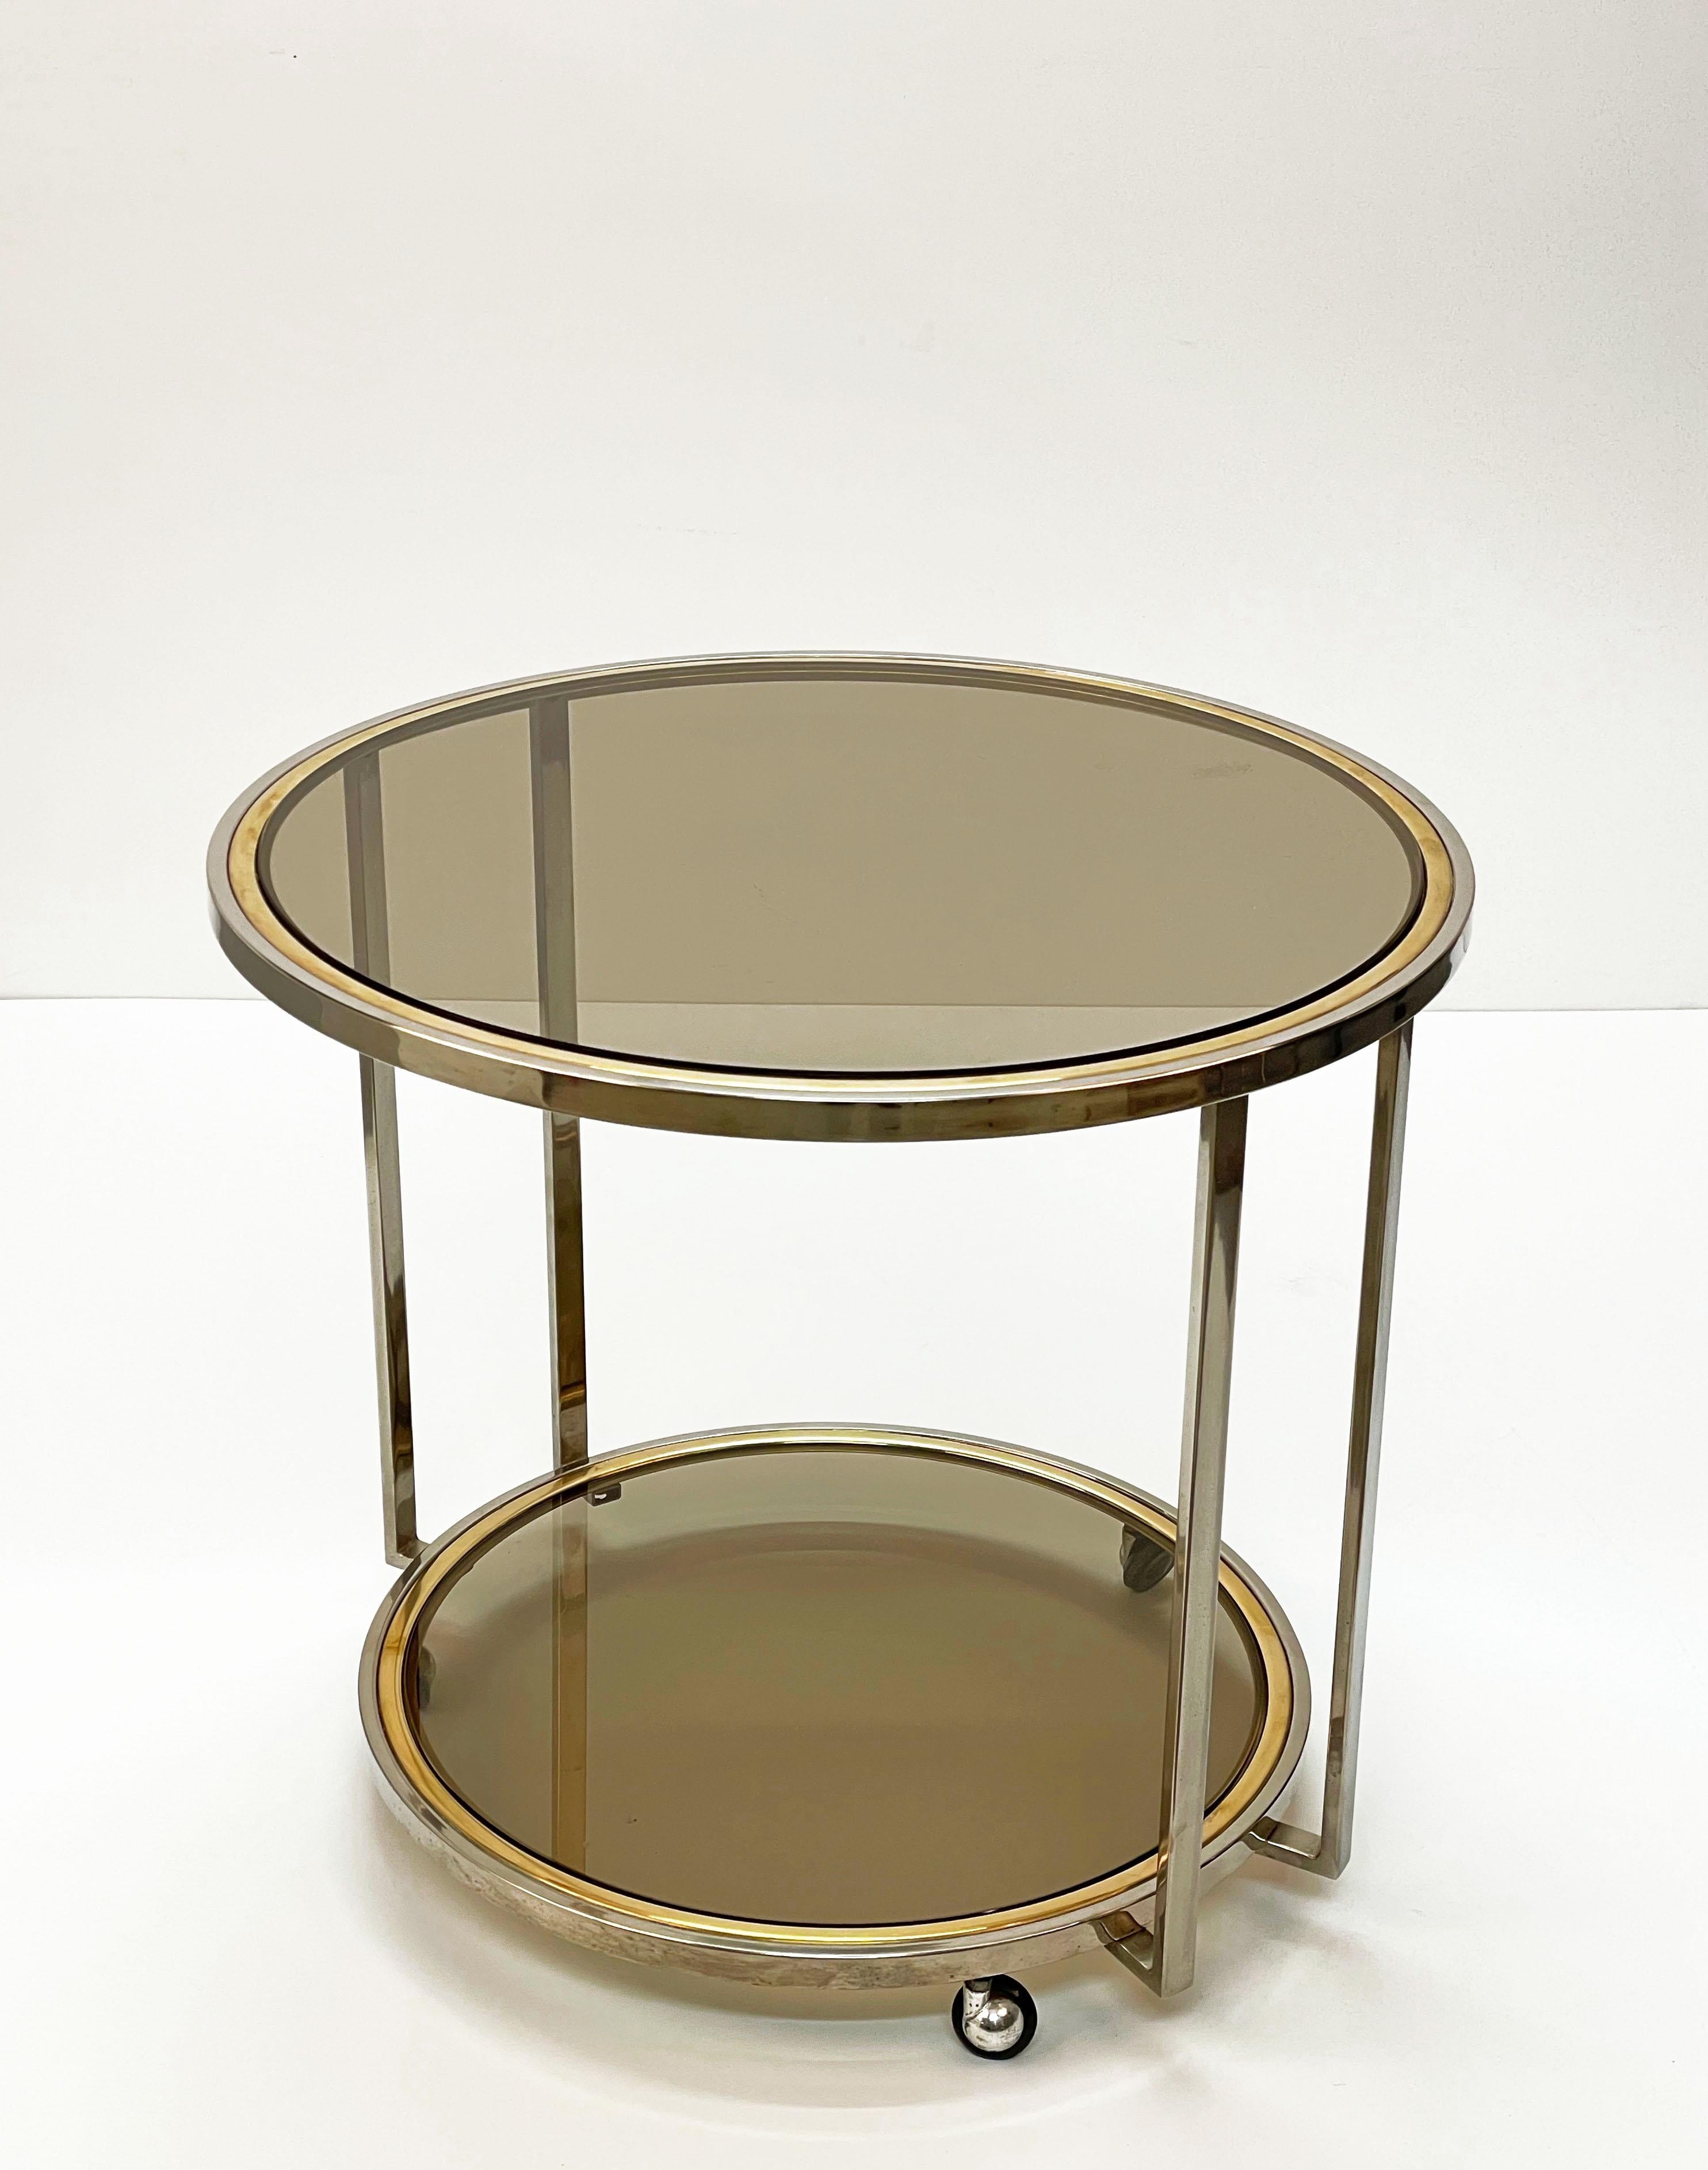 Midcentury Brass and Chrome and Glass Italian Coffee Table after Romeo Rega 1970 For Sale 6